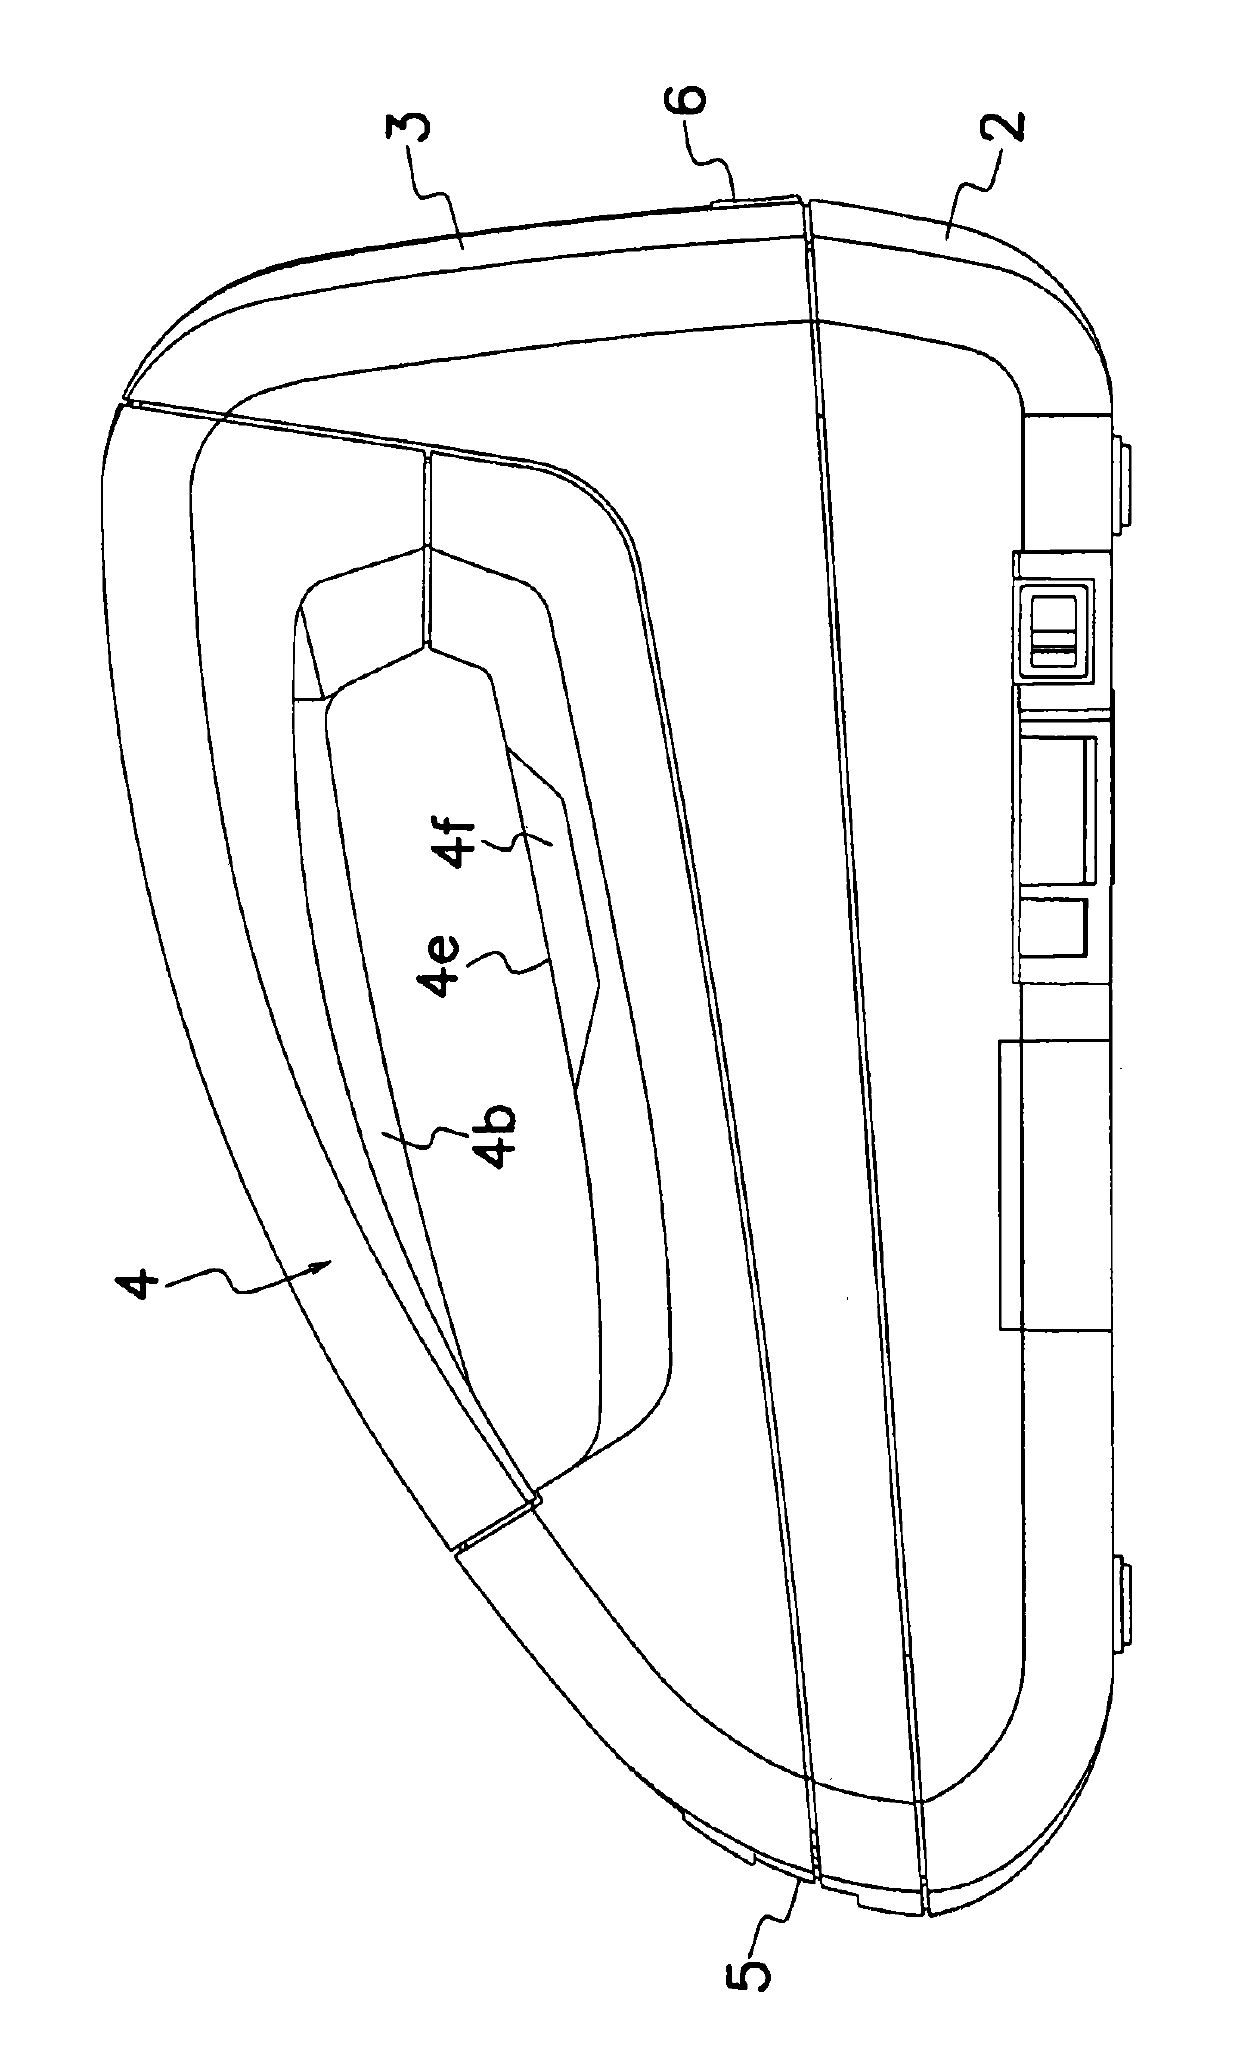 Device for aligning and conveying paper sheets or the like